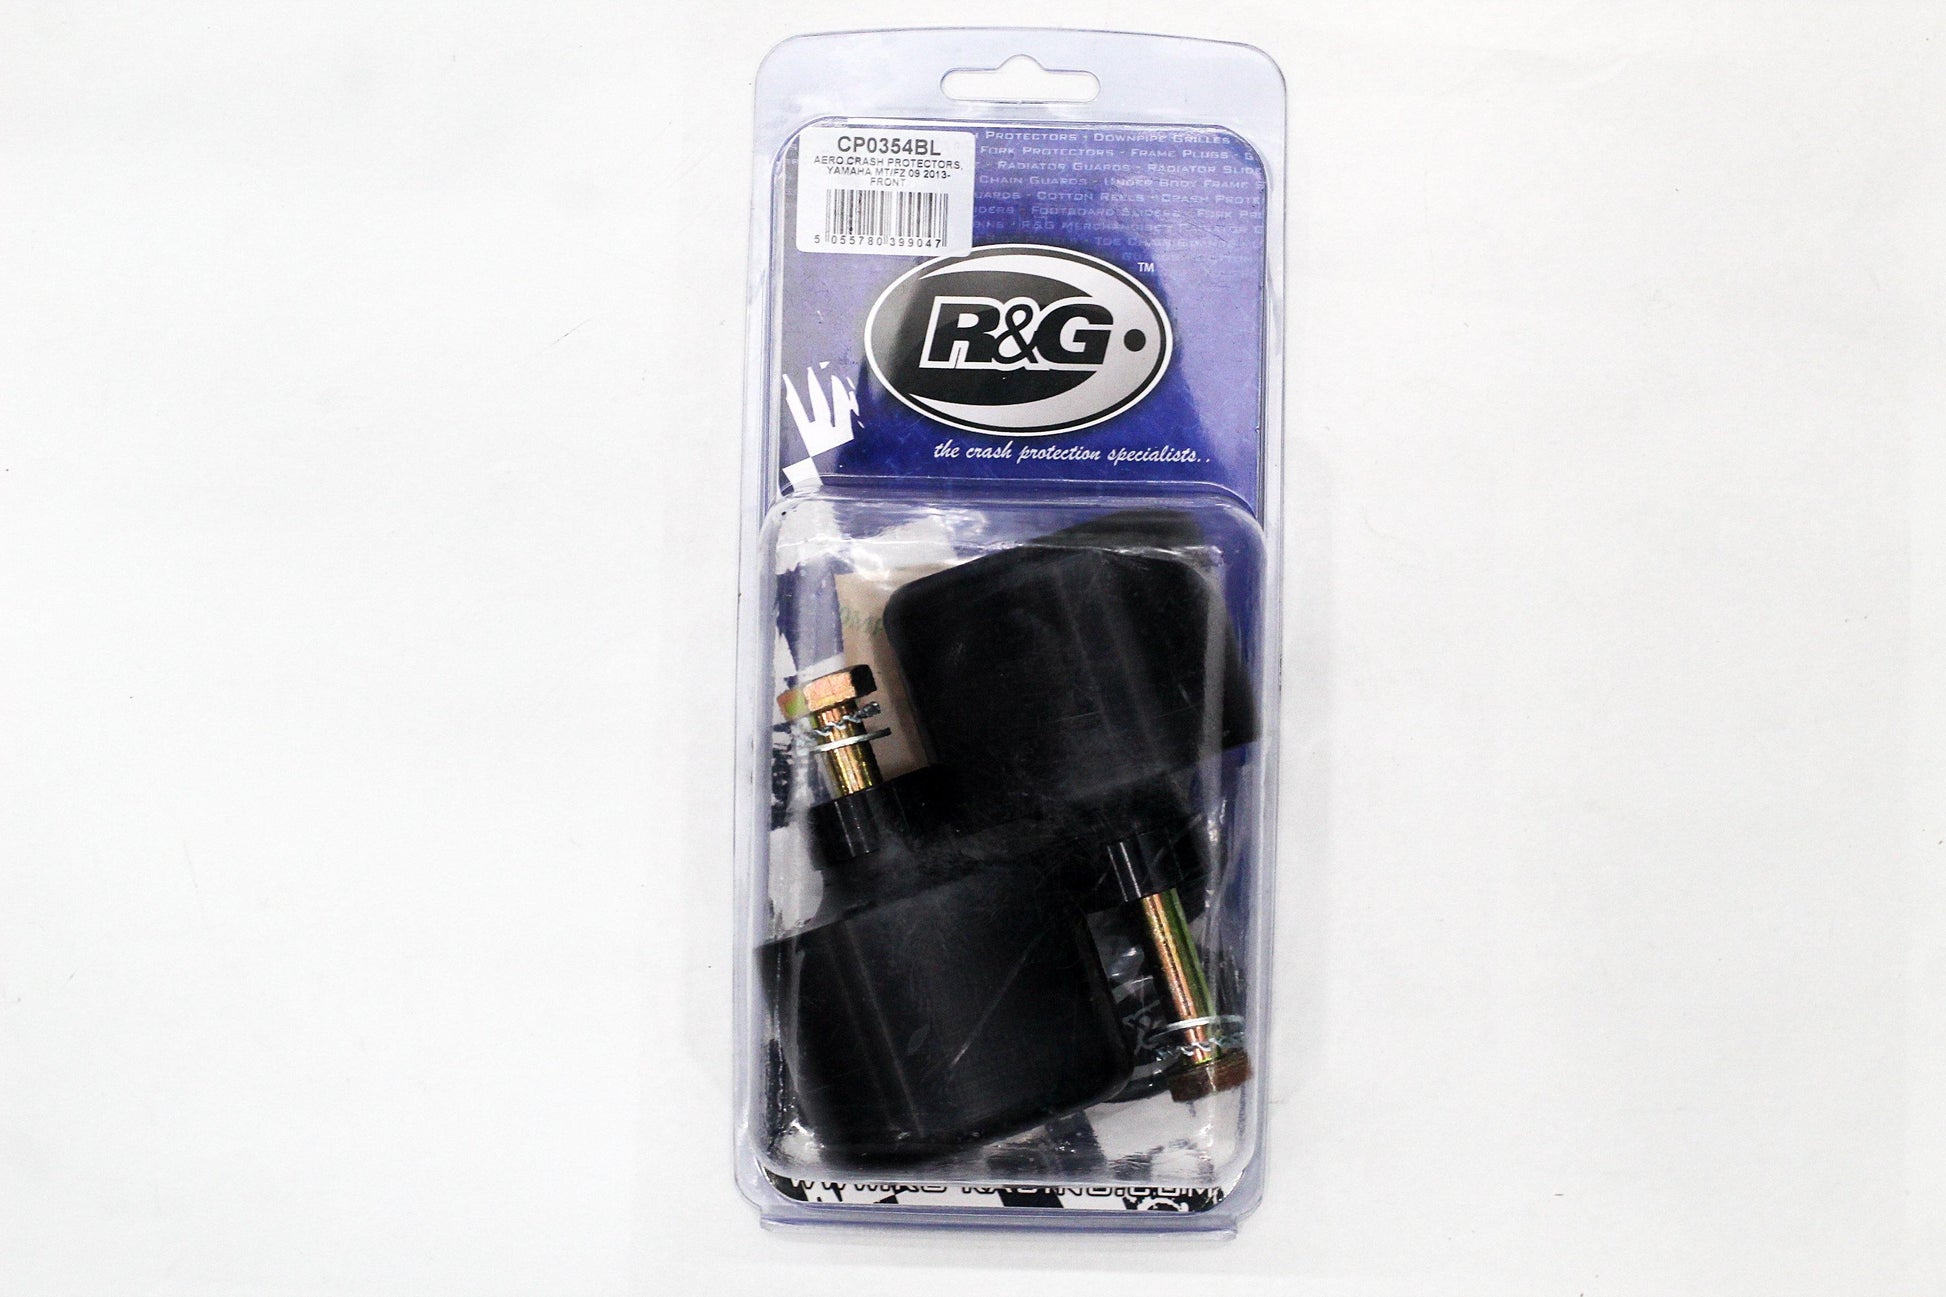 R&G Crash Protectors Aero Style fits for Yamaha MT-09, FZ-09, XSR900 & Tracer 900 GT - Durian Bikers